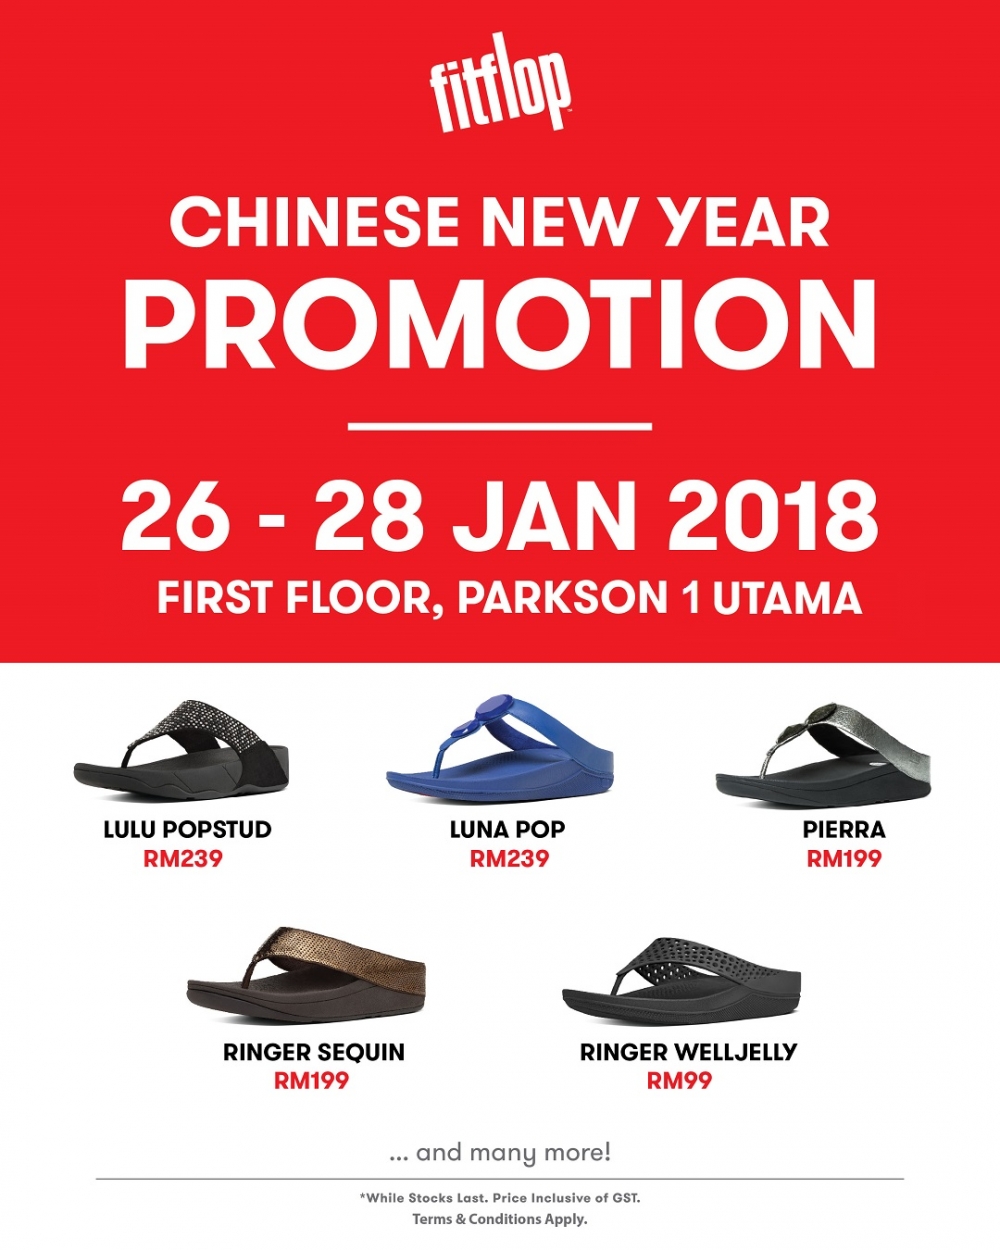 Parkson Malaysia - Clearance SALE 70% off Pierre Cardin and Feraud Ladies  Handbag Fair is happening now at Event Hall at Ground Floor, Parkson IOI  City Mall from 1 – 31 July